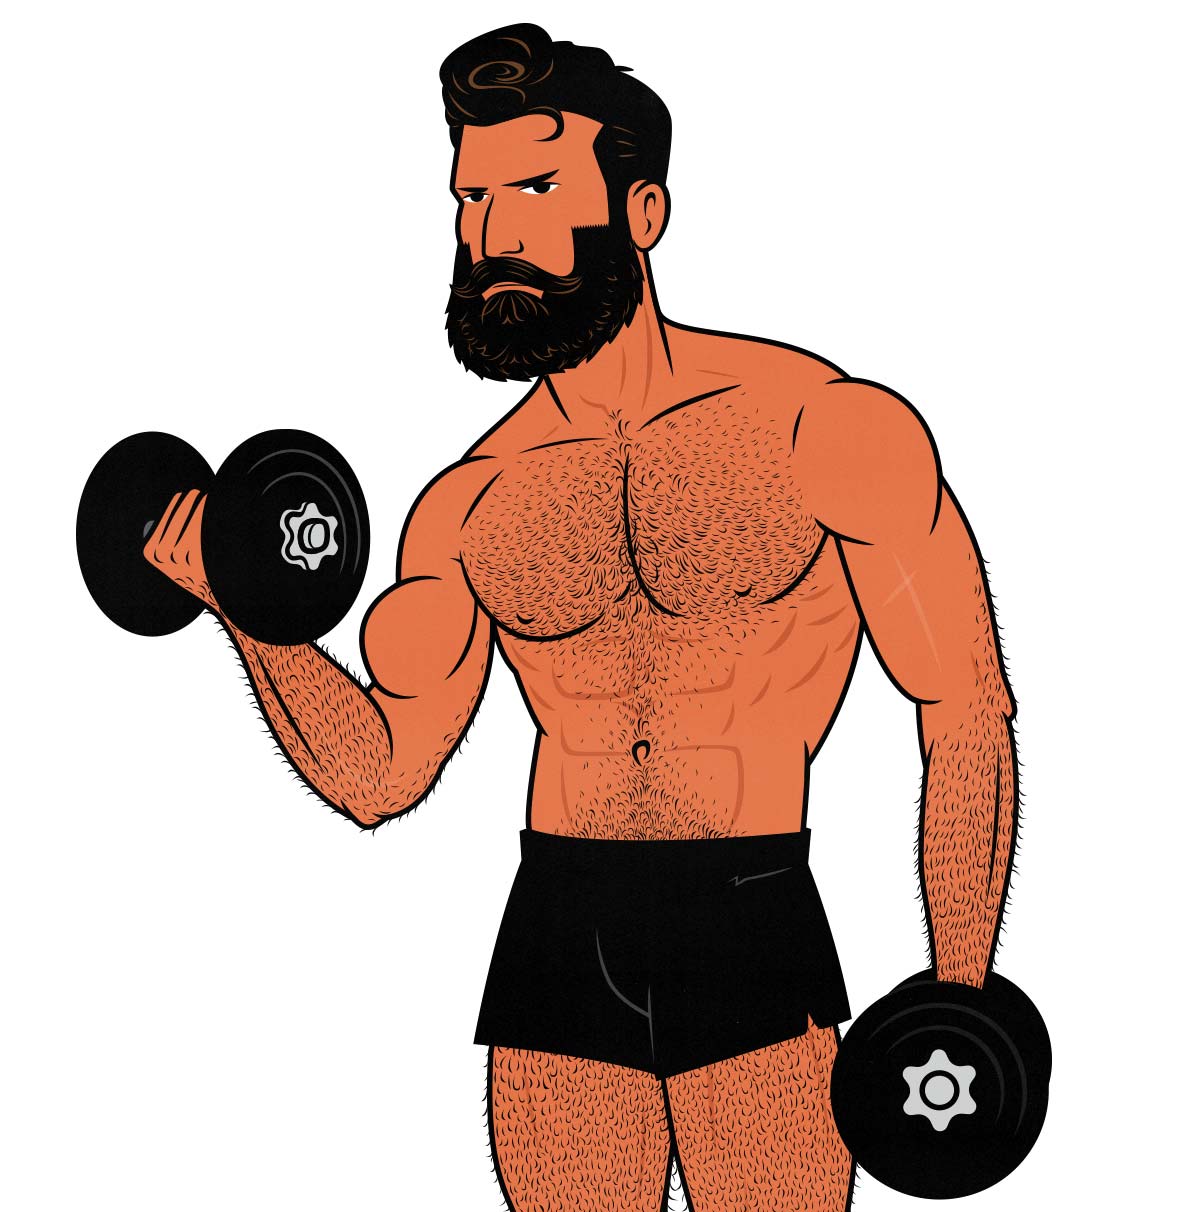 Illustration of a lifter doing biceps curls on Pull Day of his 6-day workout split.